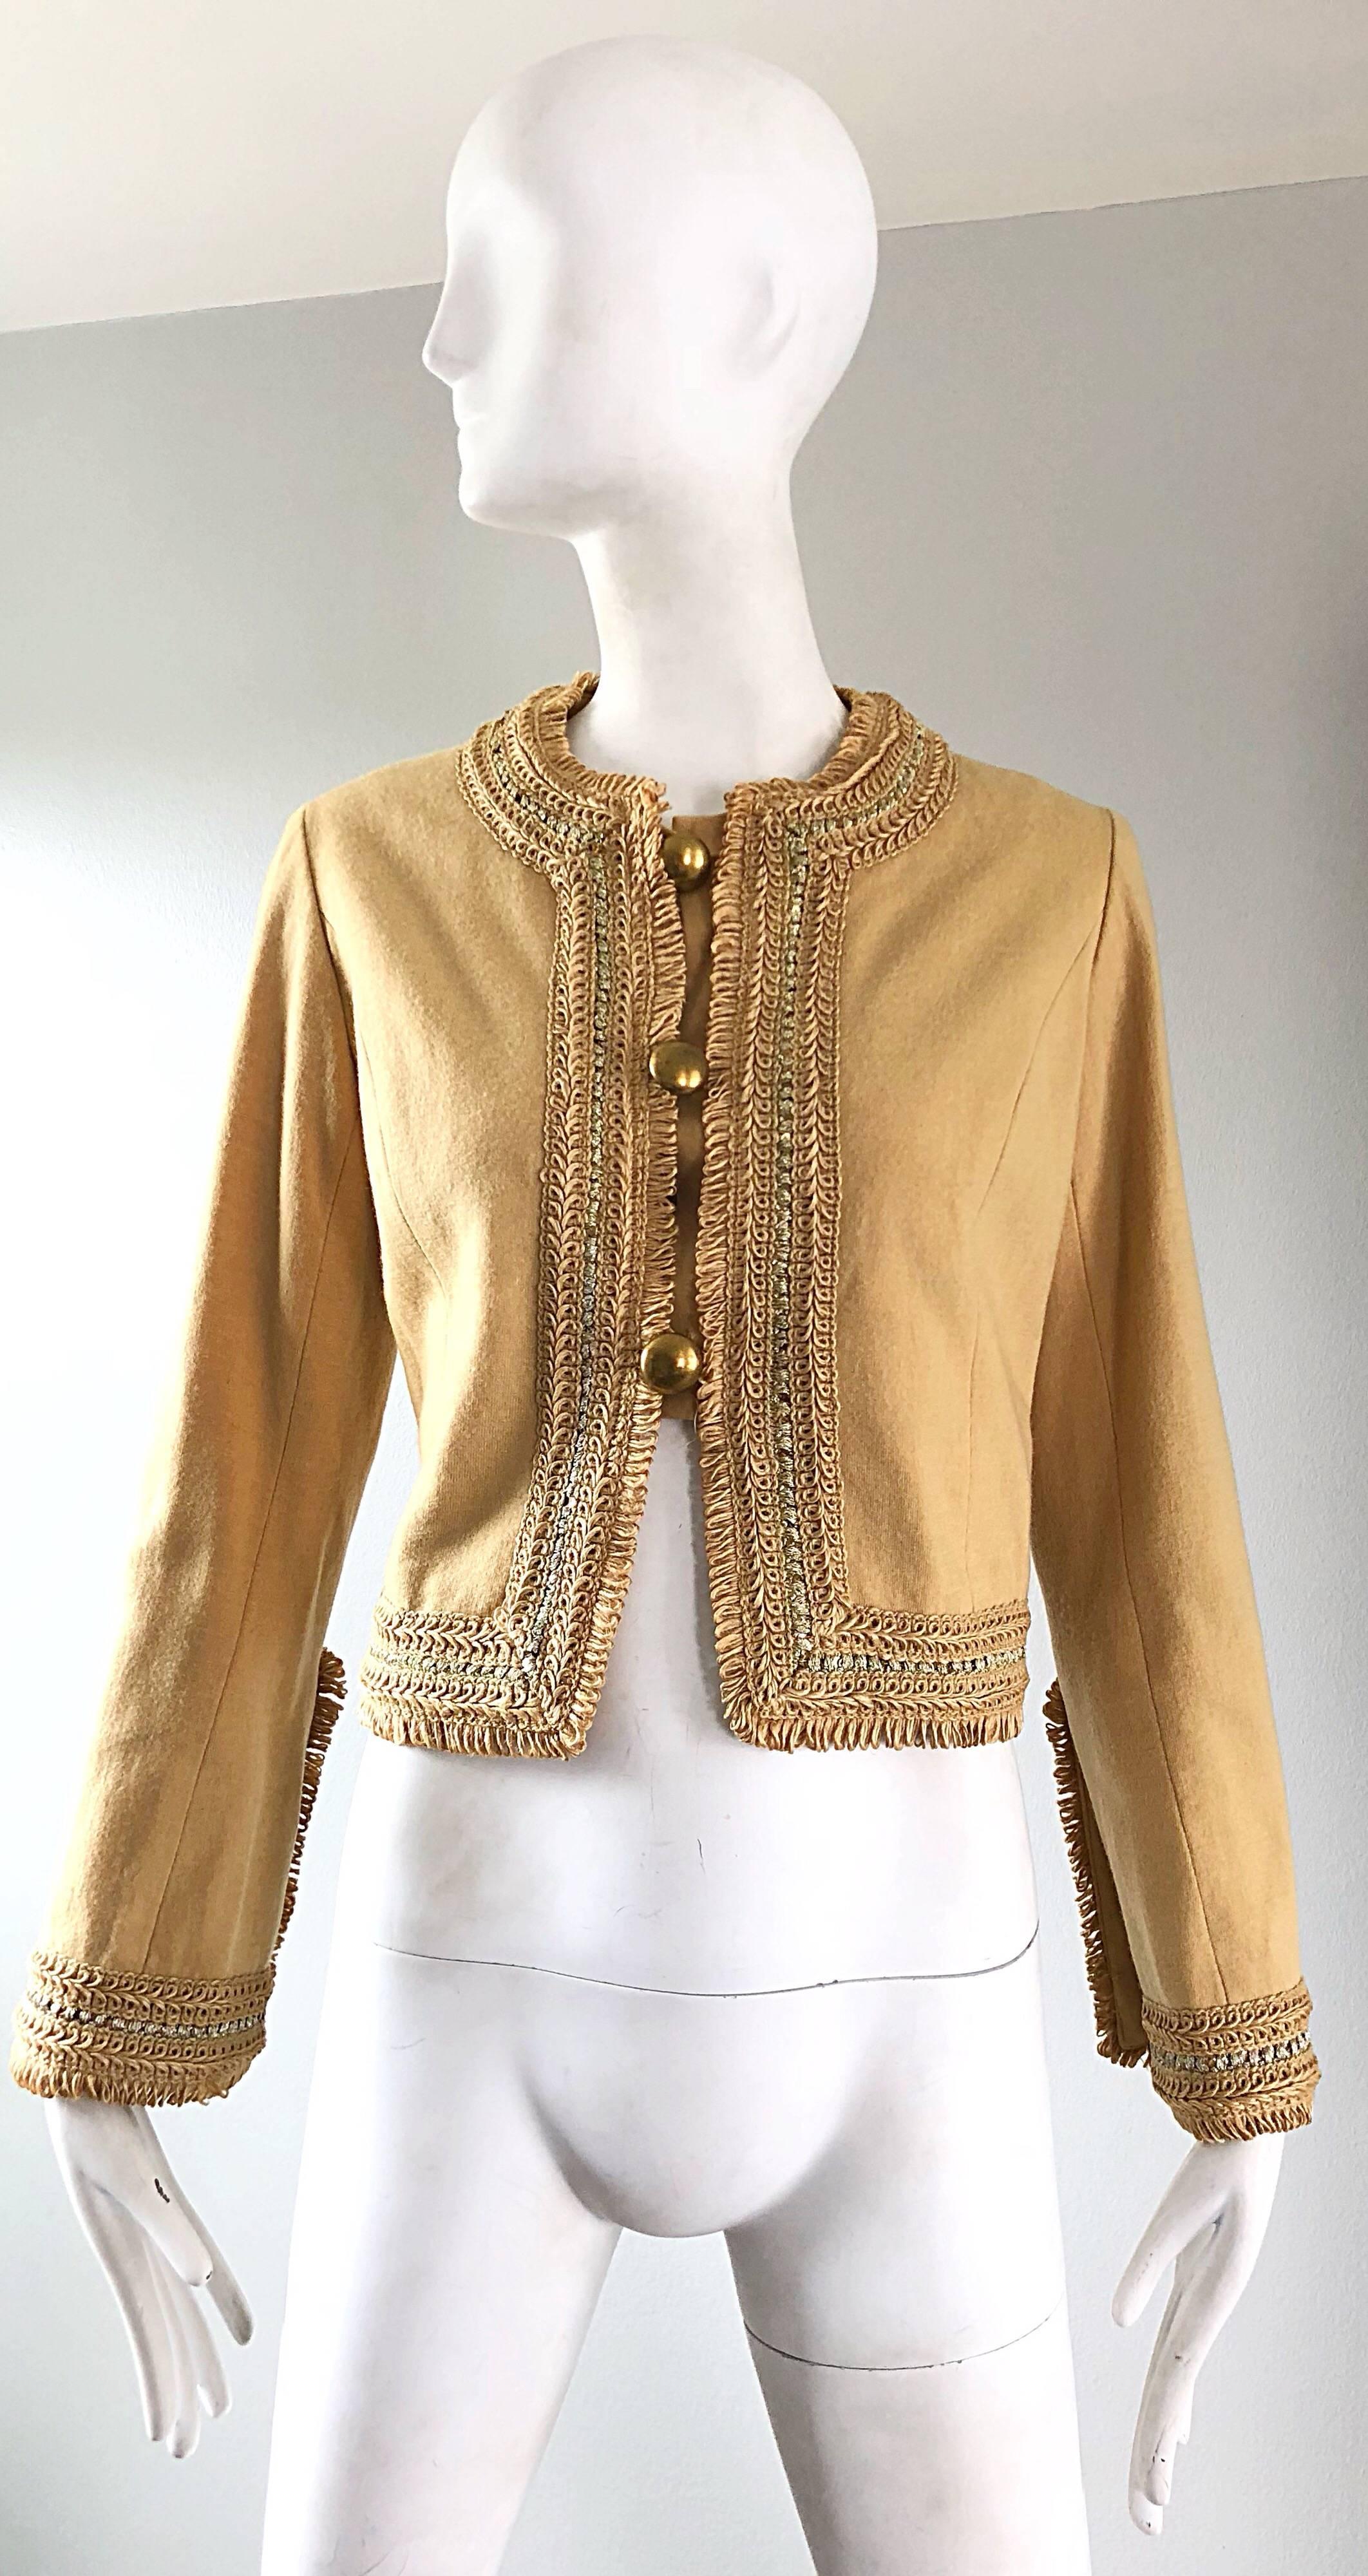 Chic 1960s JAY MORLEY for FERN VIOLLETE camel / tan sequined embroidered Jackie O style cropped jacket! Jay Morley was a premeire Hollywood costume designer in the 50s and 60s. Fern Violette gave him free reign to design during the 60s and 70s.